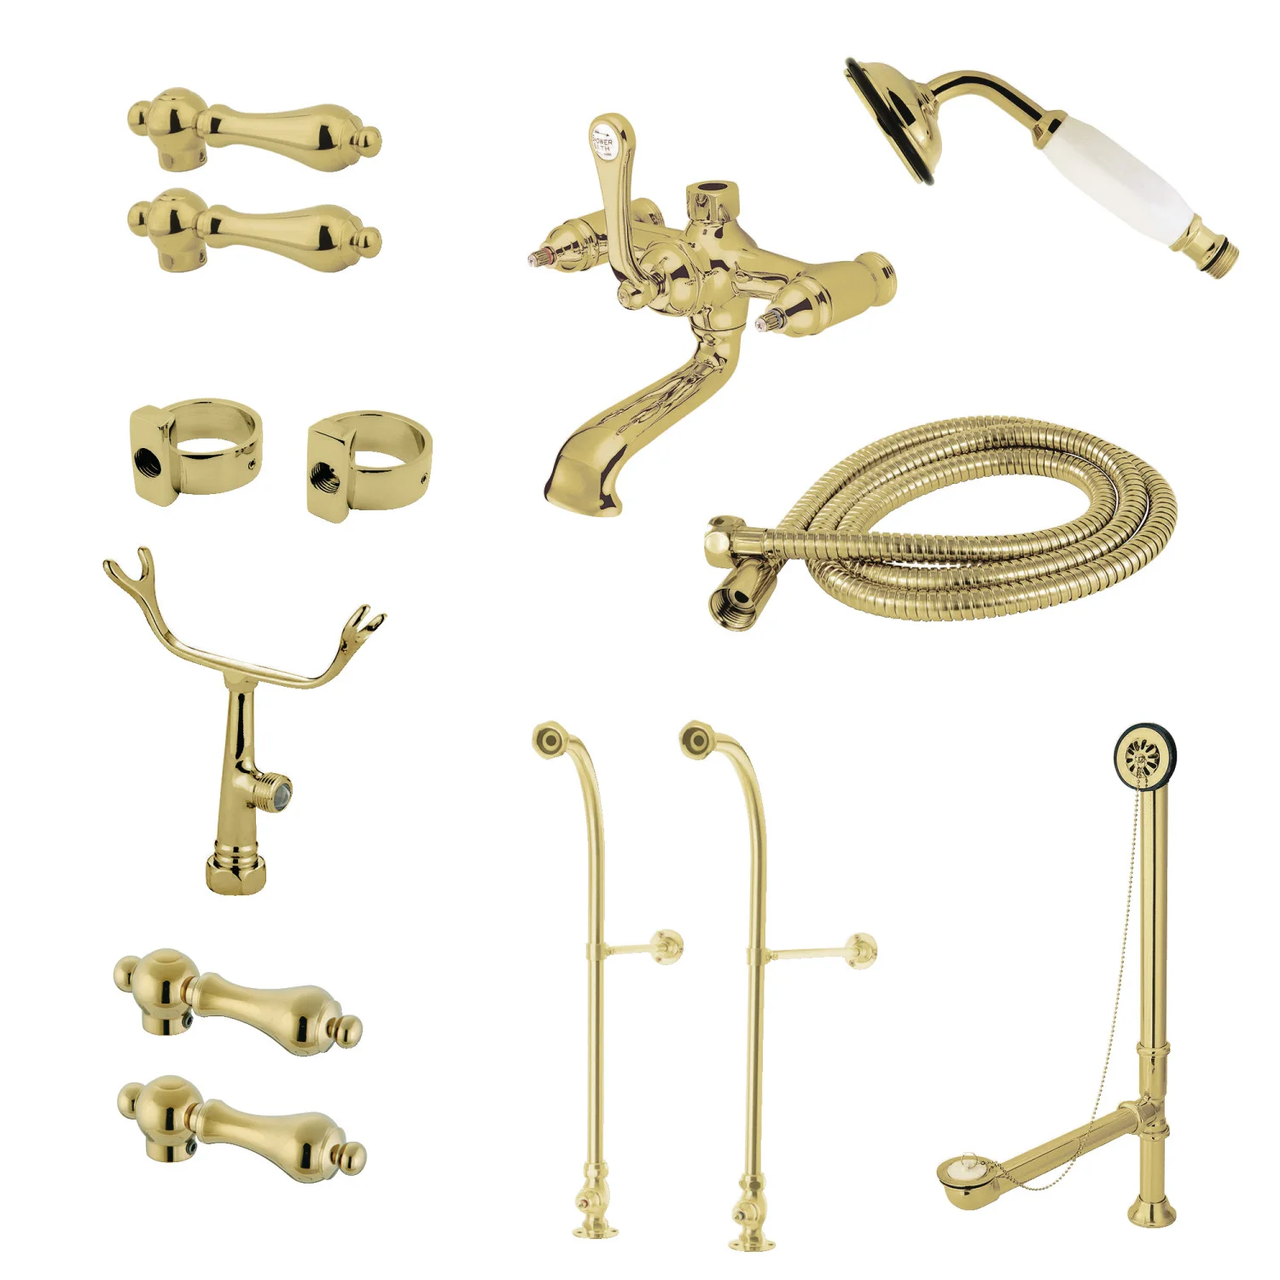 Kingston Brass Vintage Freestanding Clawfoot Tub Faucet Combo - BNGBath